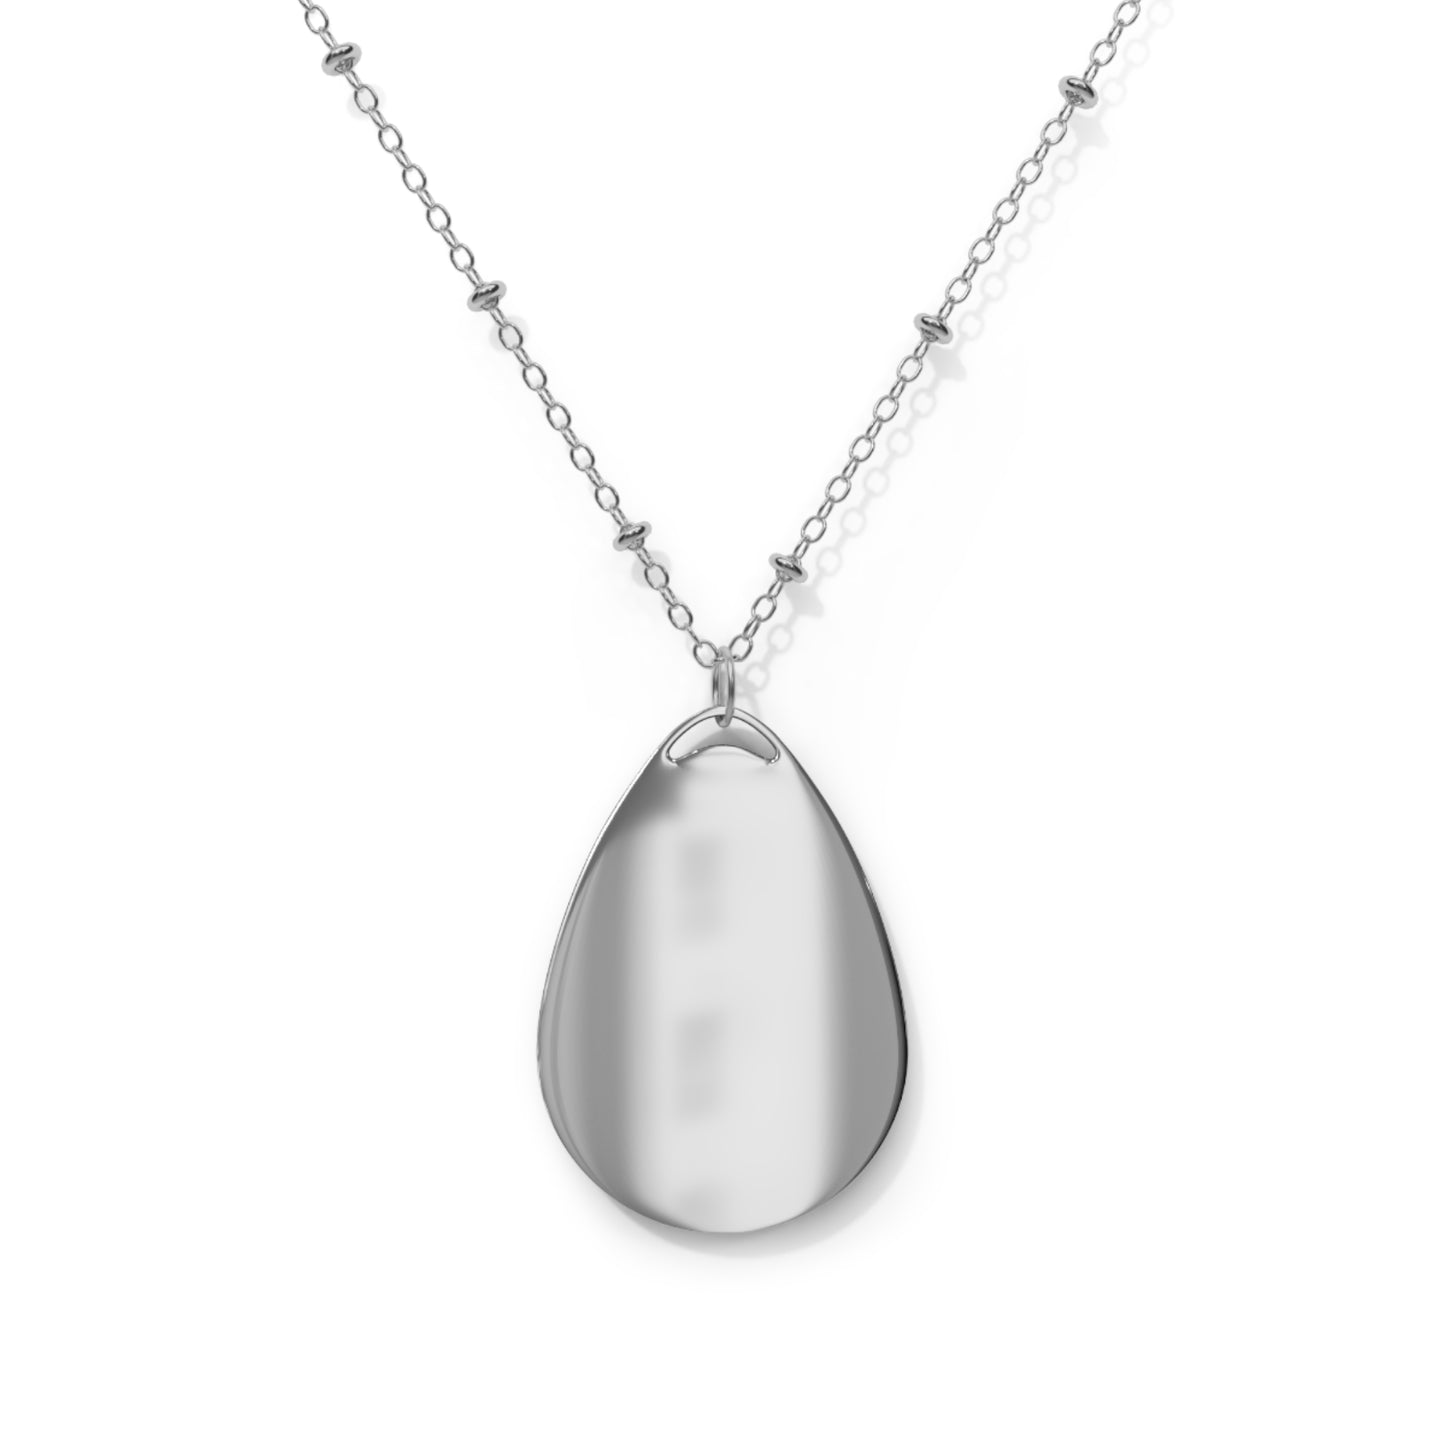 Foreign Born Military Spouse - Oval Necklace